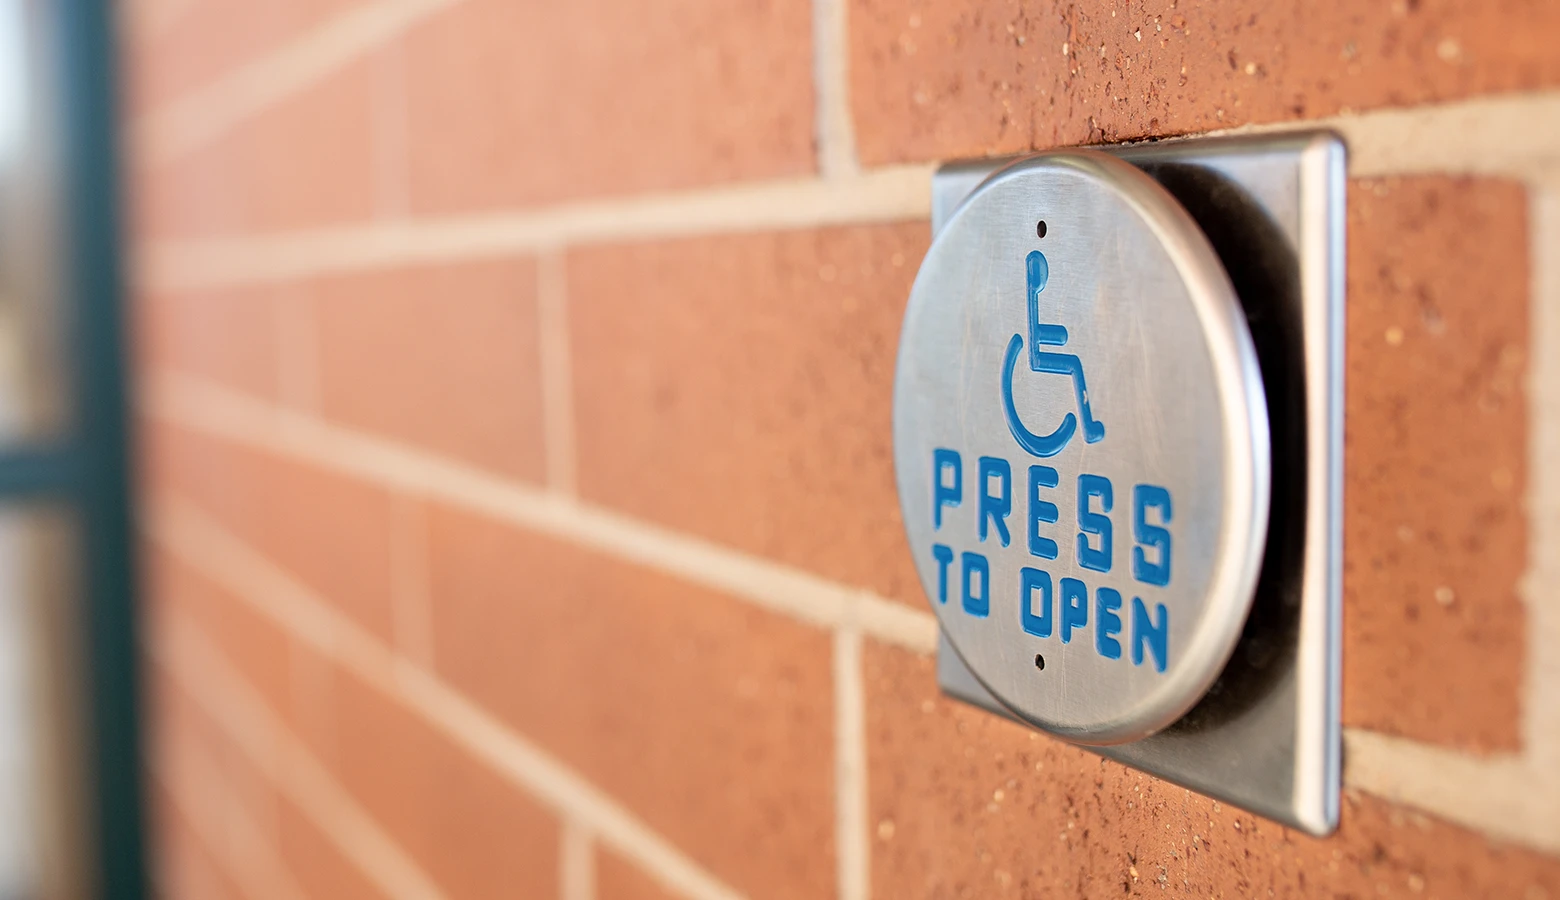 A sign on a brick wall that says "Press to Open", with the international accessibility symbol.